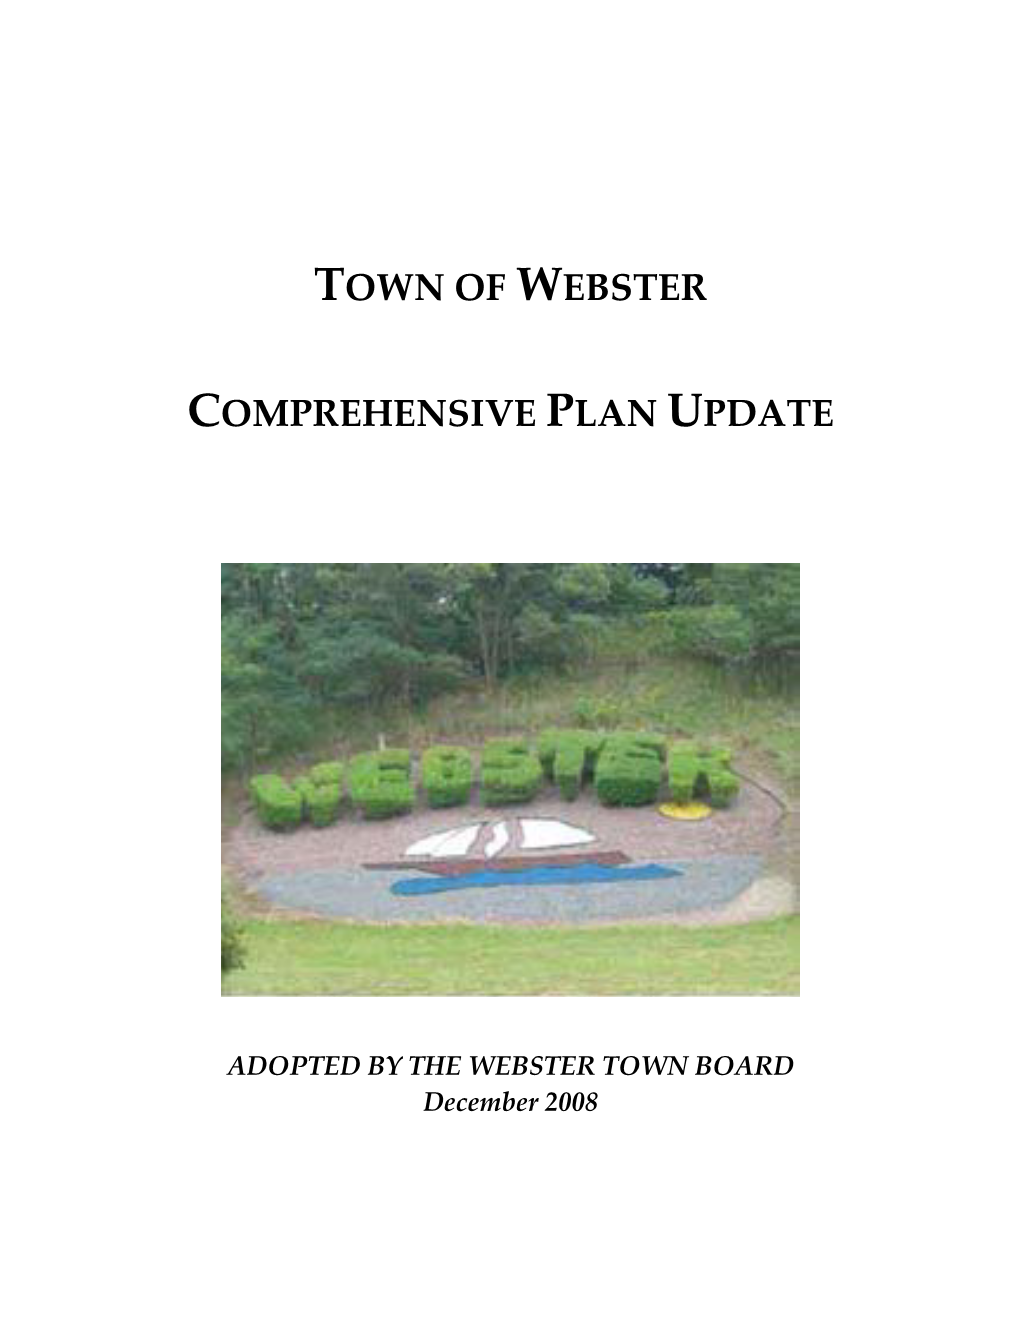 Town of Webster Comprehensive Plan Update Was Prepared by a Comprehensive Plan Committee Consisting of Citizens and Town Officials